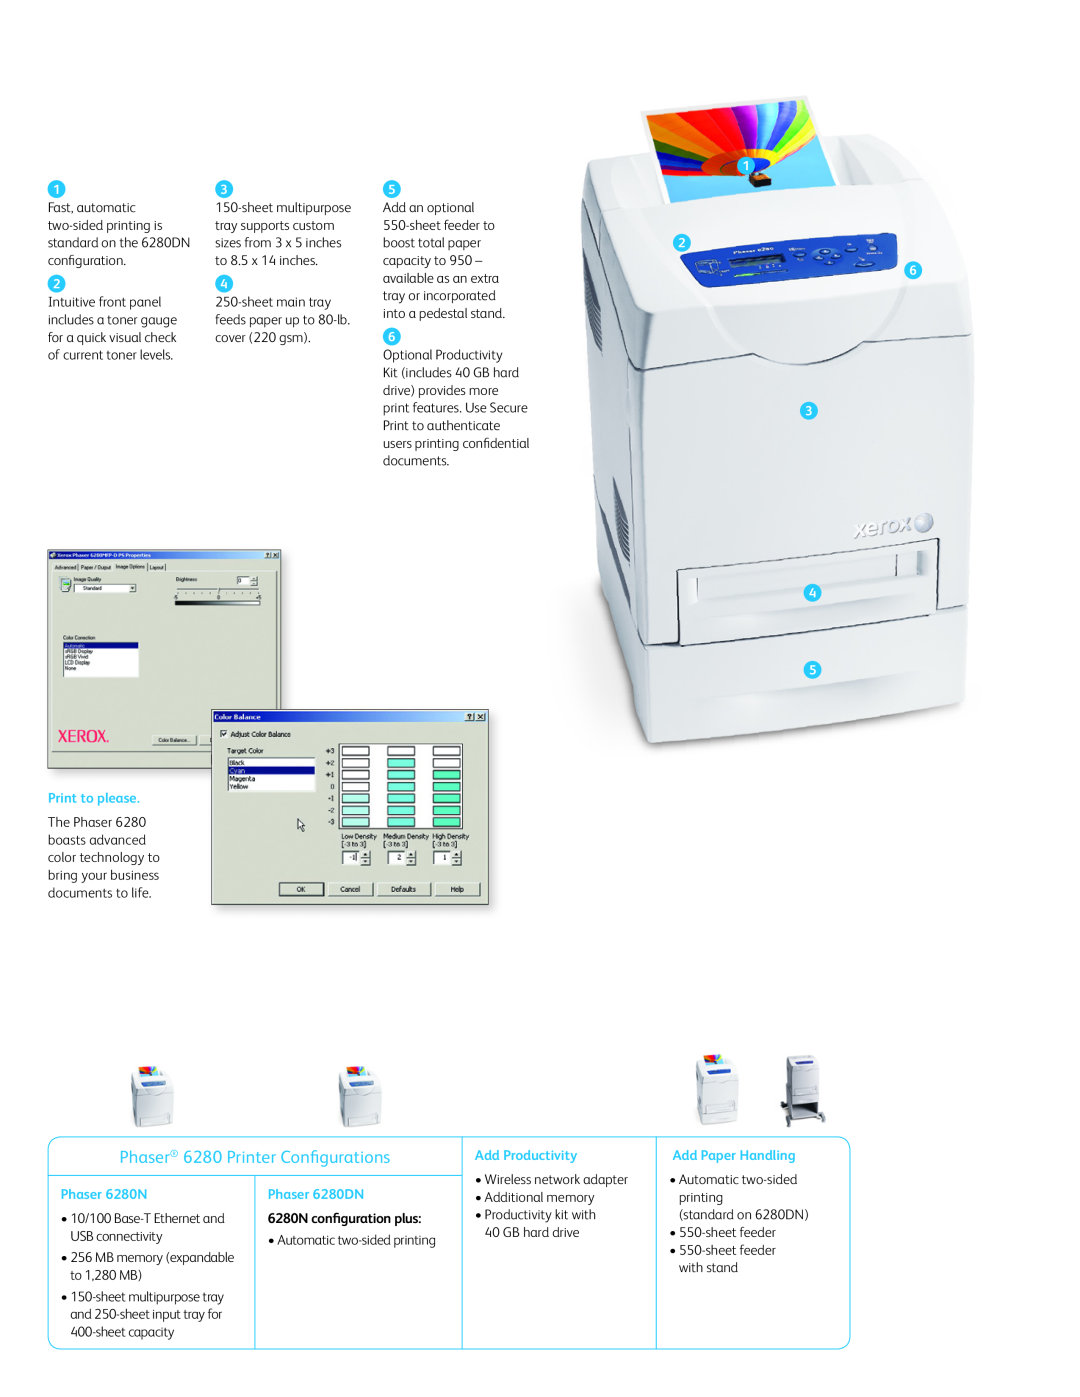 Xerox 6280DN Phaser 6280 Printer Configurations, Print to please, Add Productivity, Add Paper Handling, Phaser 6280N 